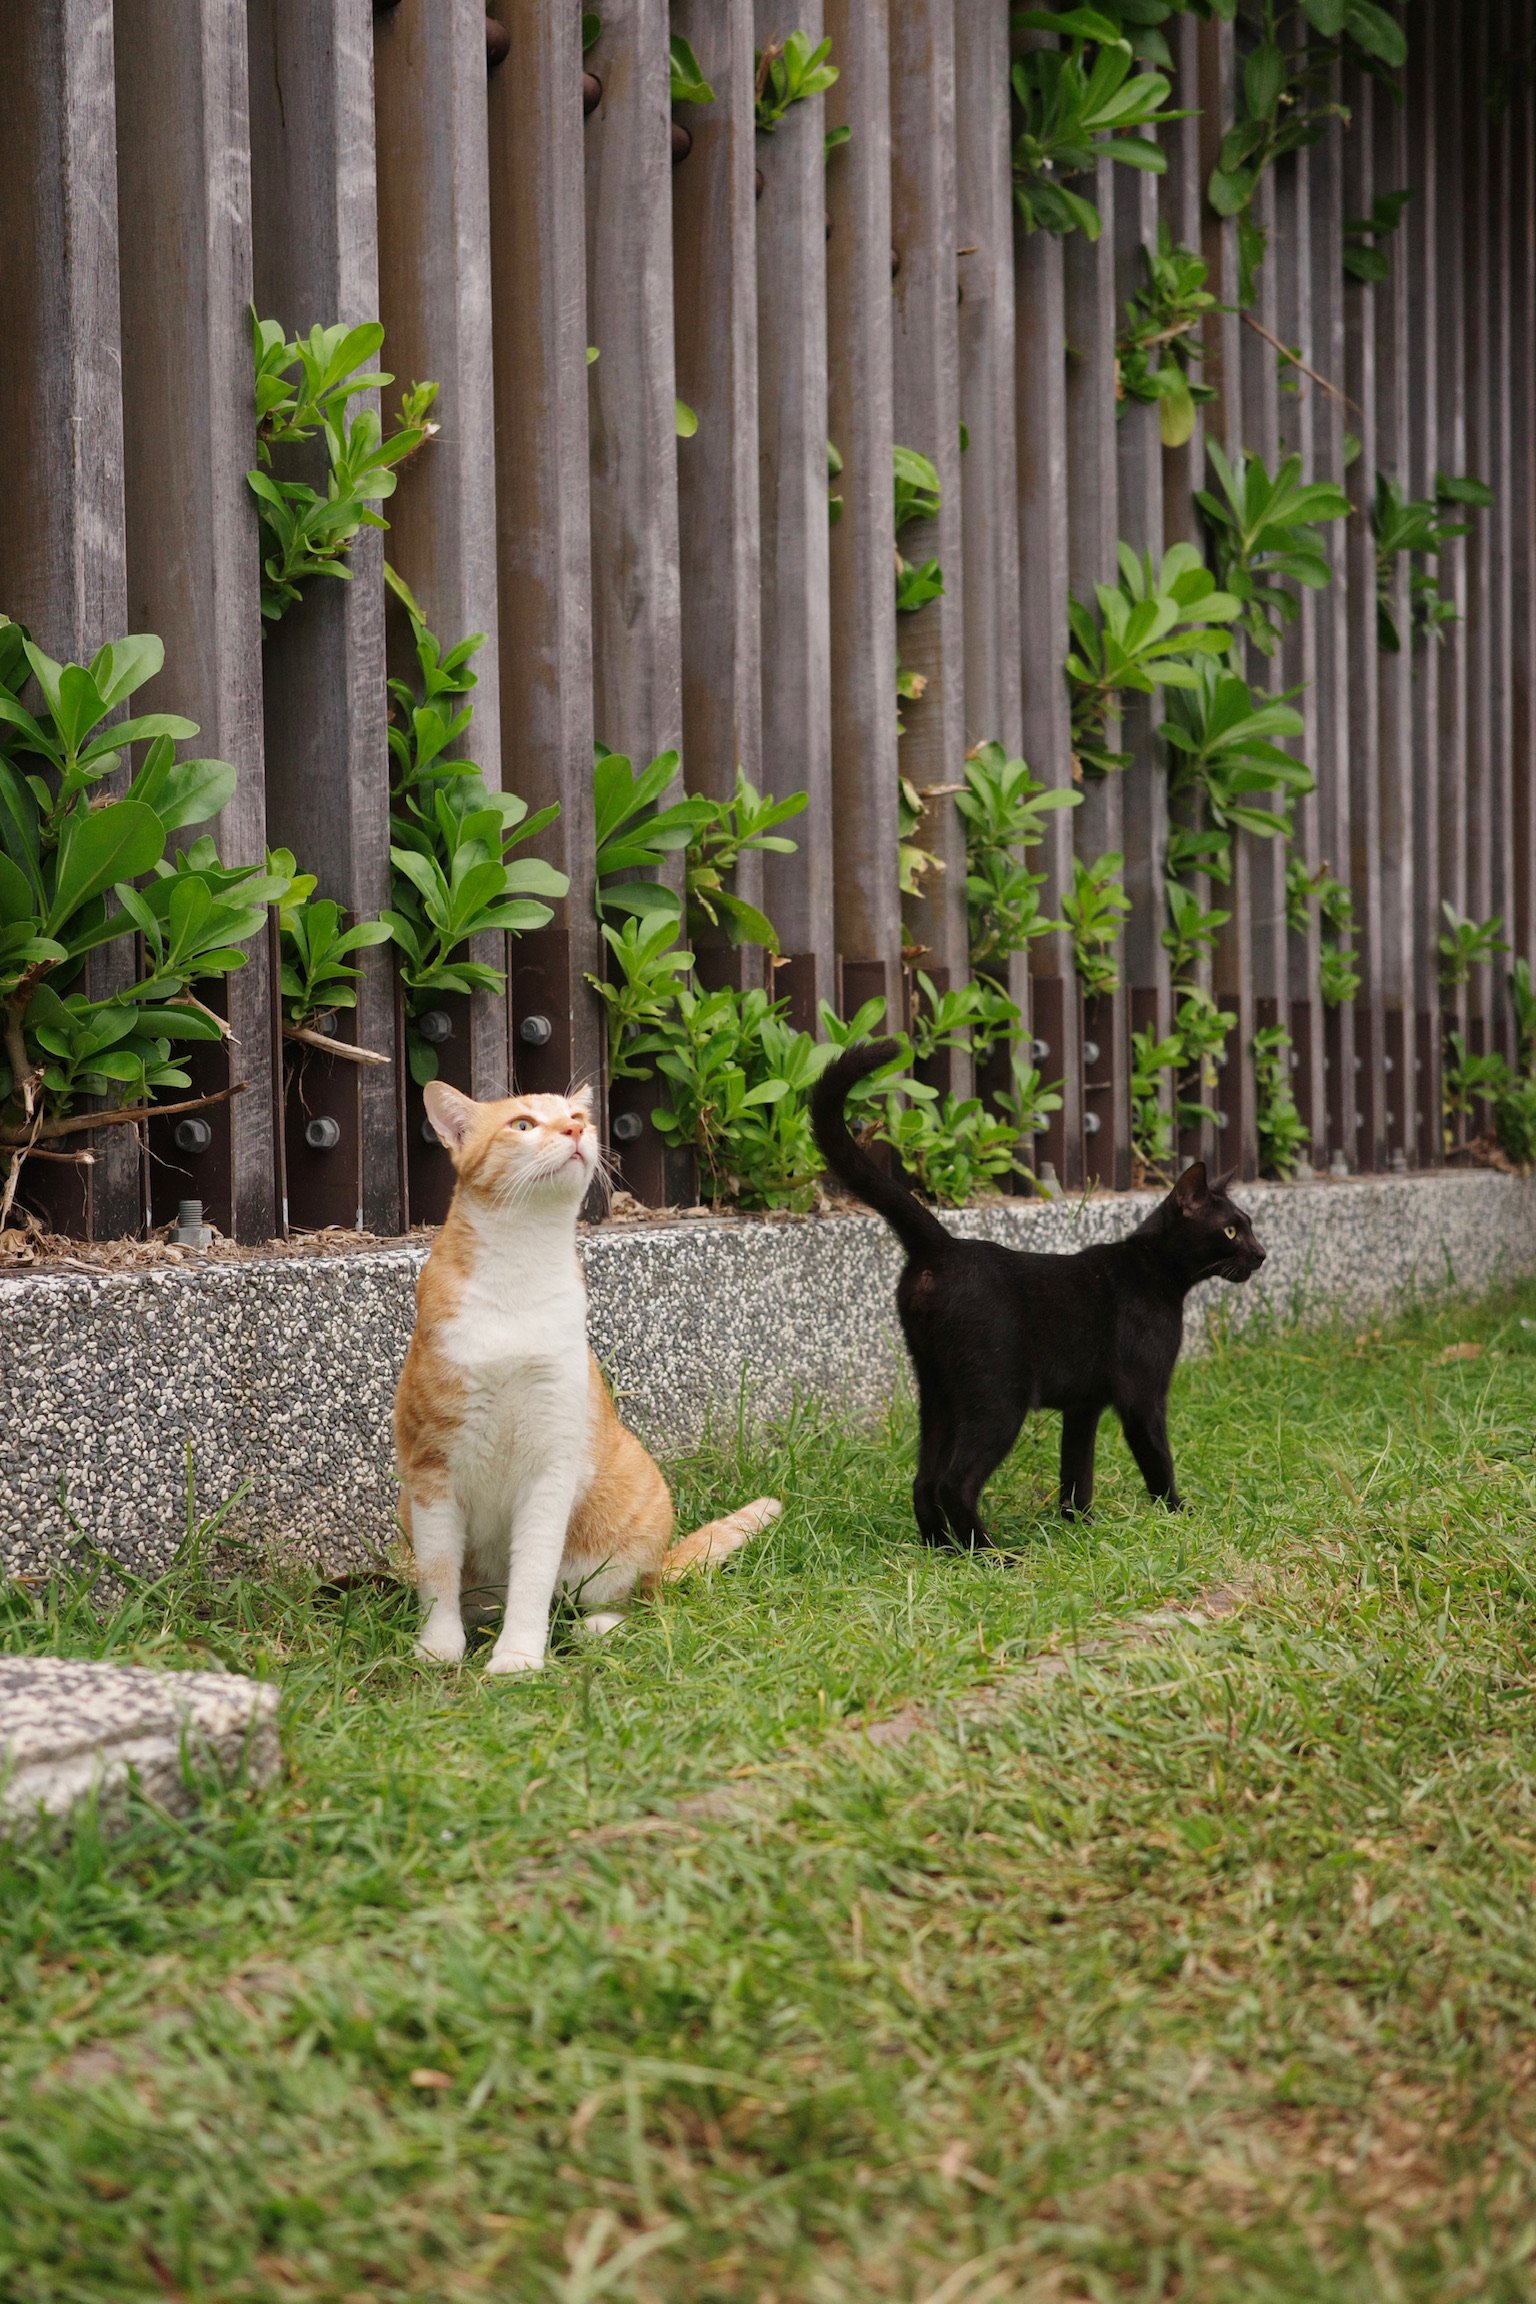 Cat with orange back sitting body facing the camera but looking towards the far right side, and a black cat walking away, in front of a fence with plants poking out.